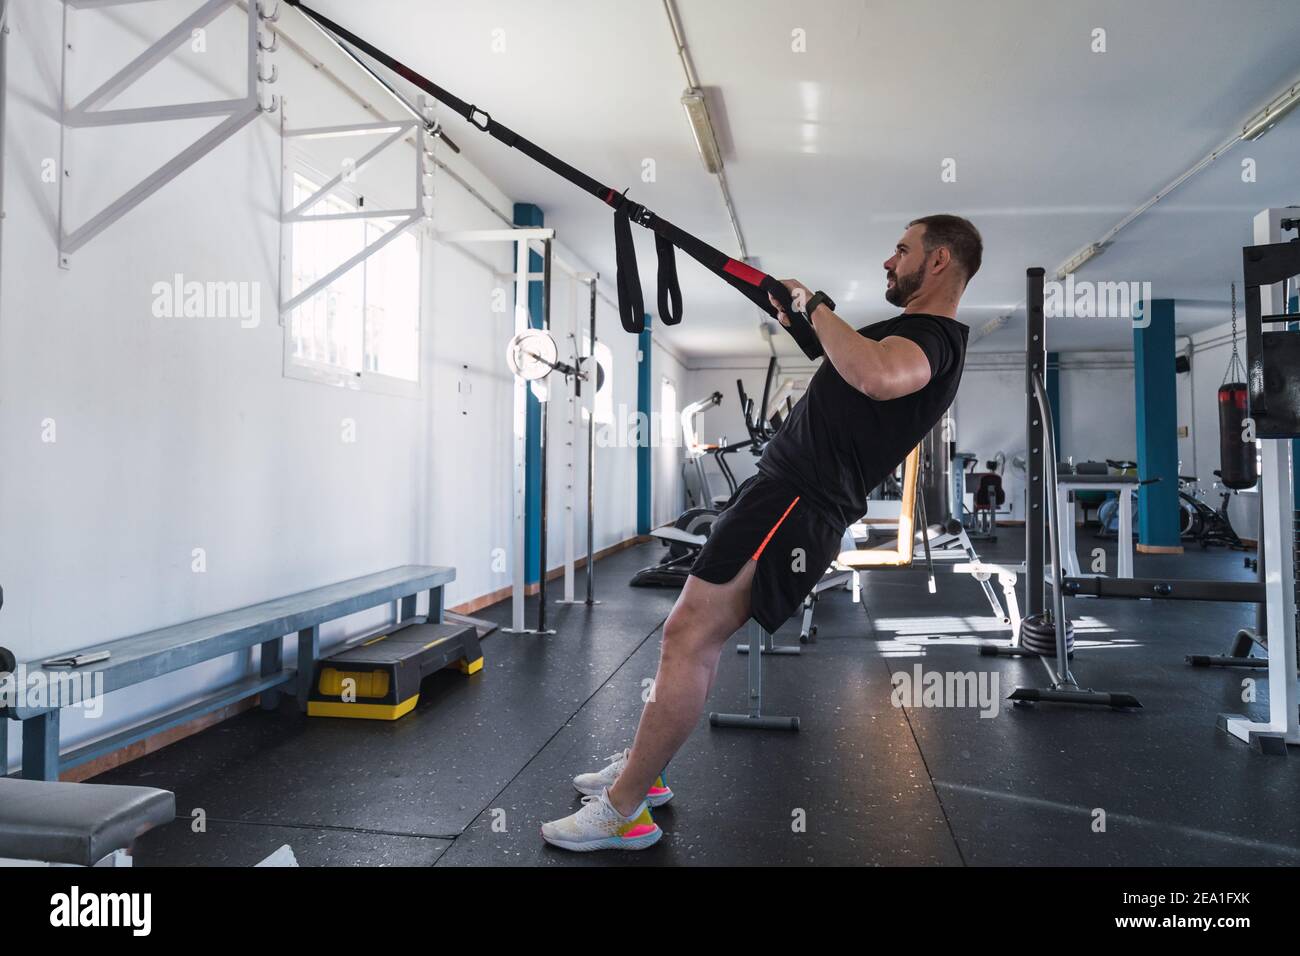 Young man doing TRX exercises at the gym. TRX training Stock Photo